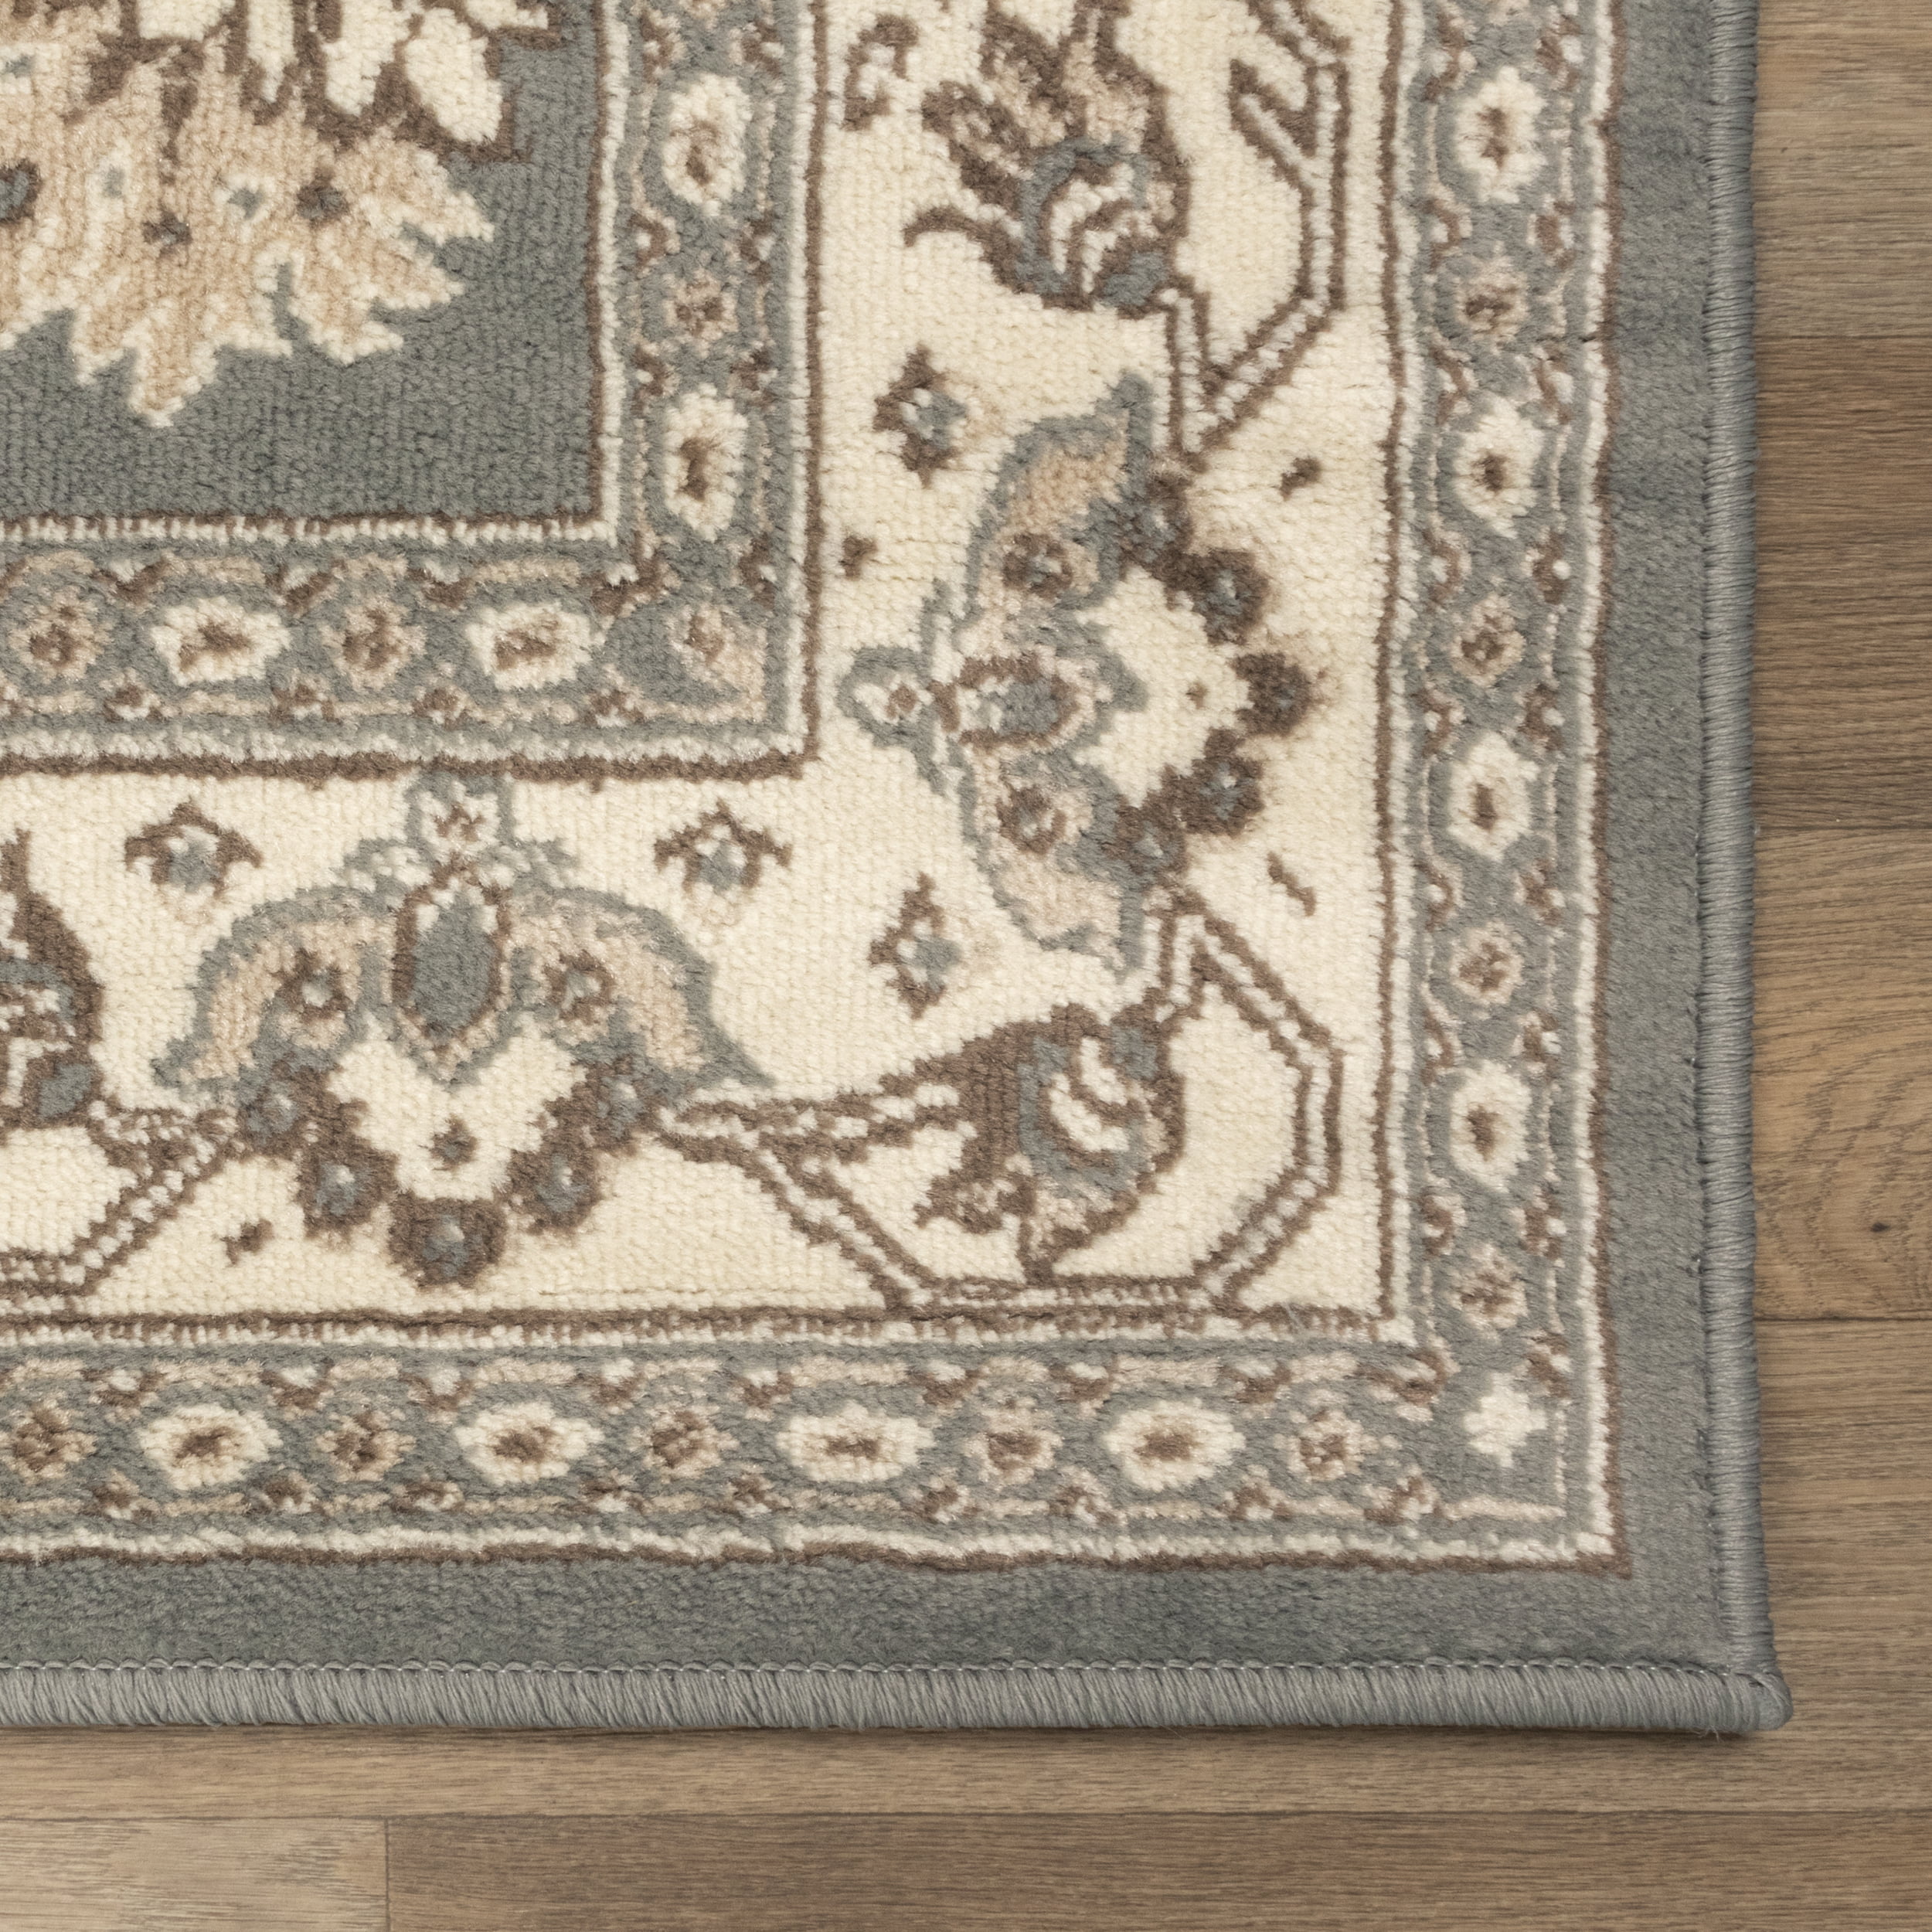 Kingfield Designer Area Rug Collection - image 3 of 5